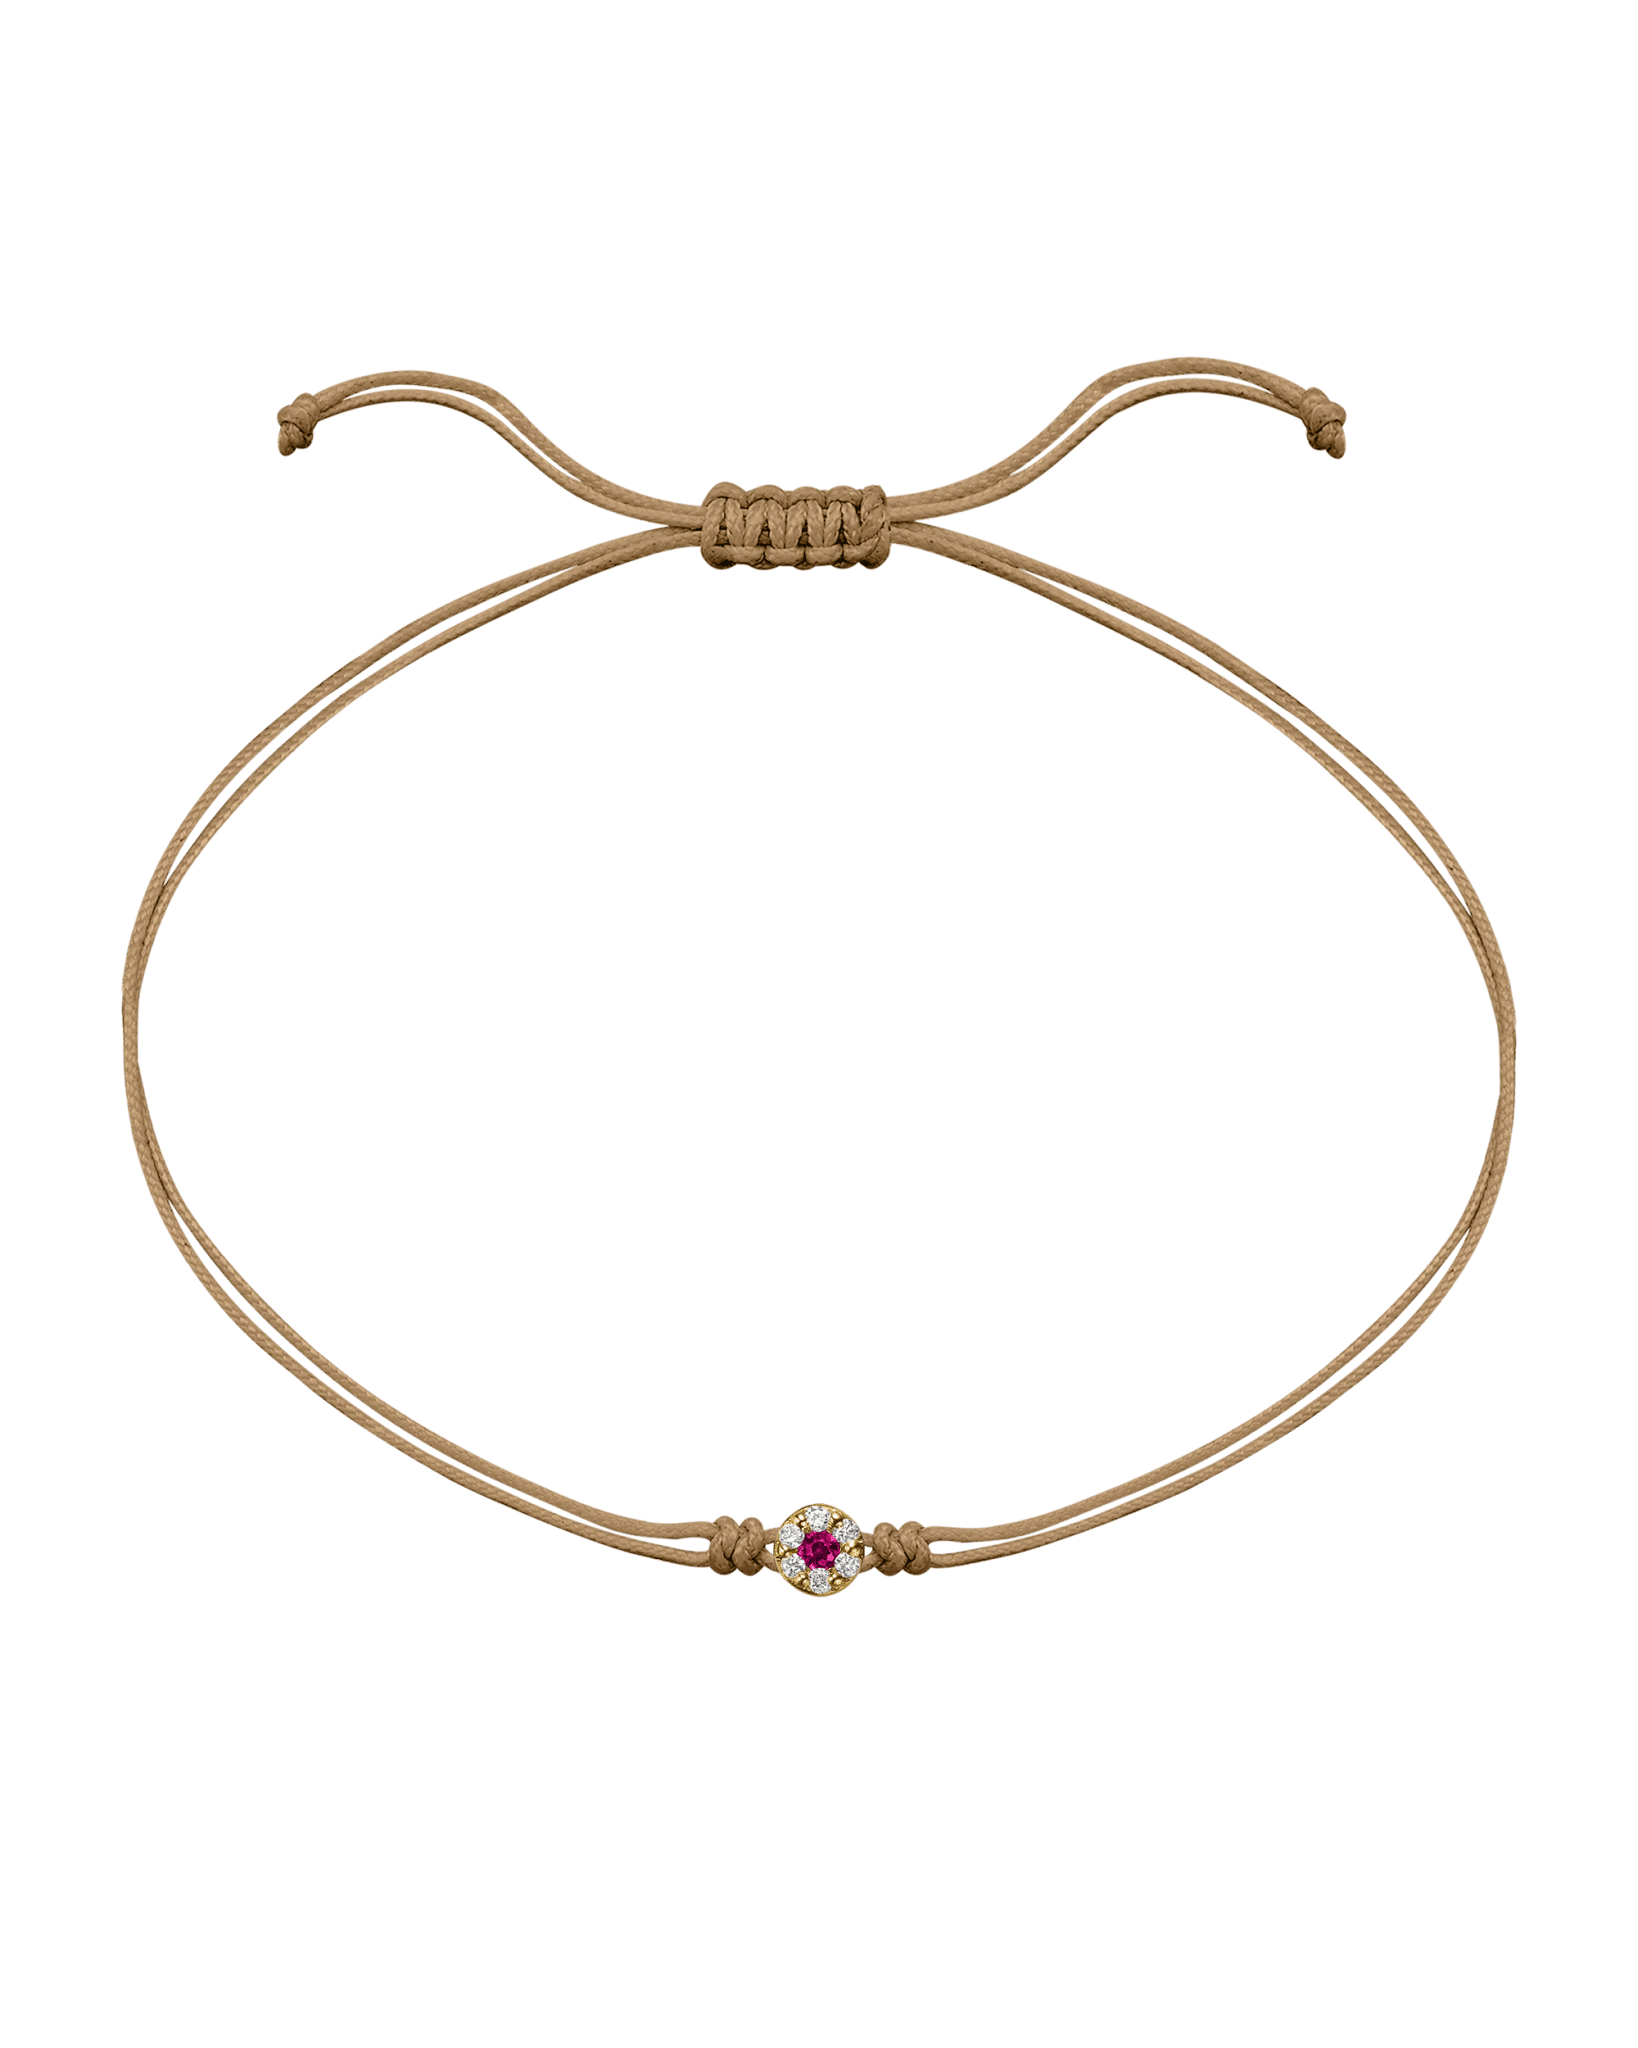 String of Love Diamond and Gemstone - 14K Yellow Gold Bracelet 14K Solid Gold Camel Ruby 